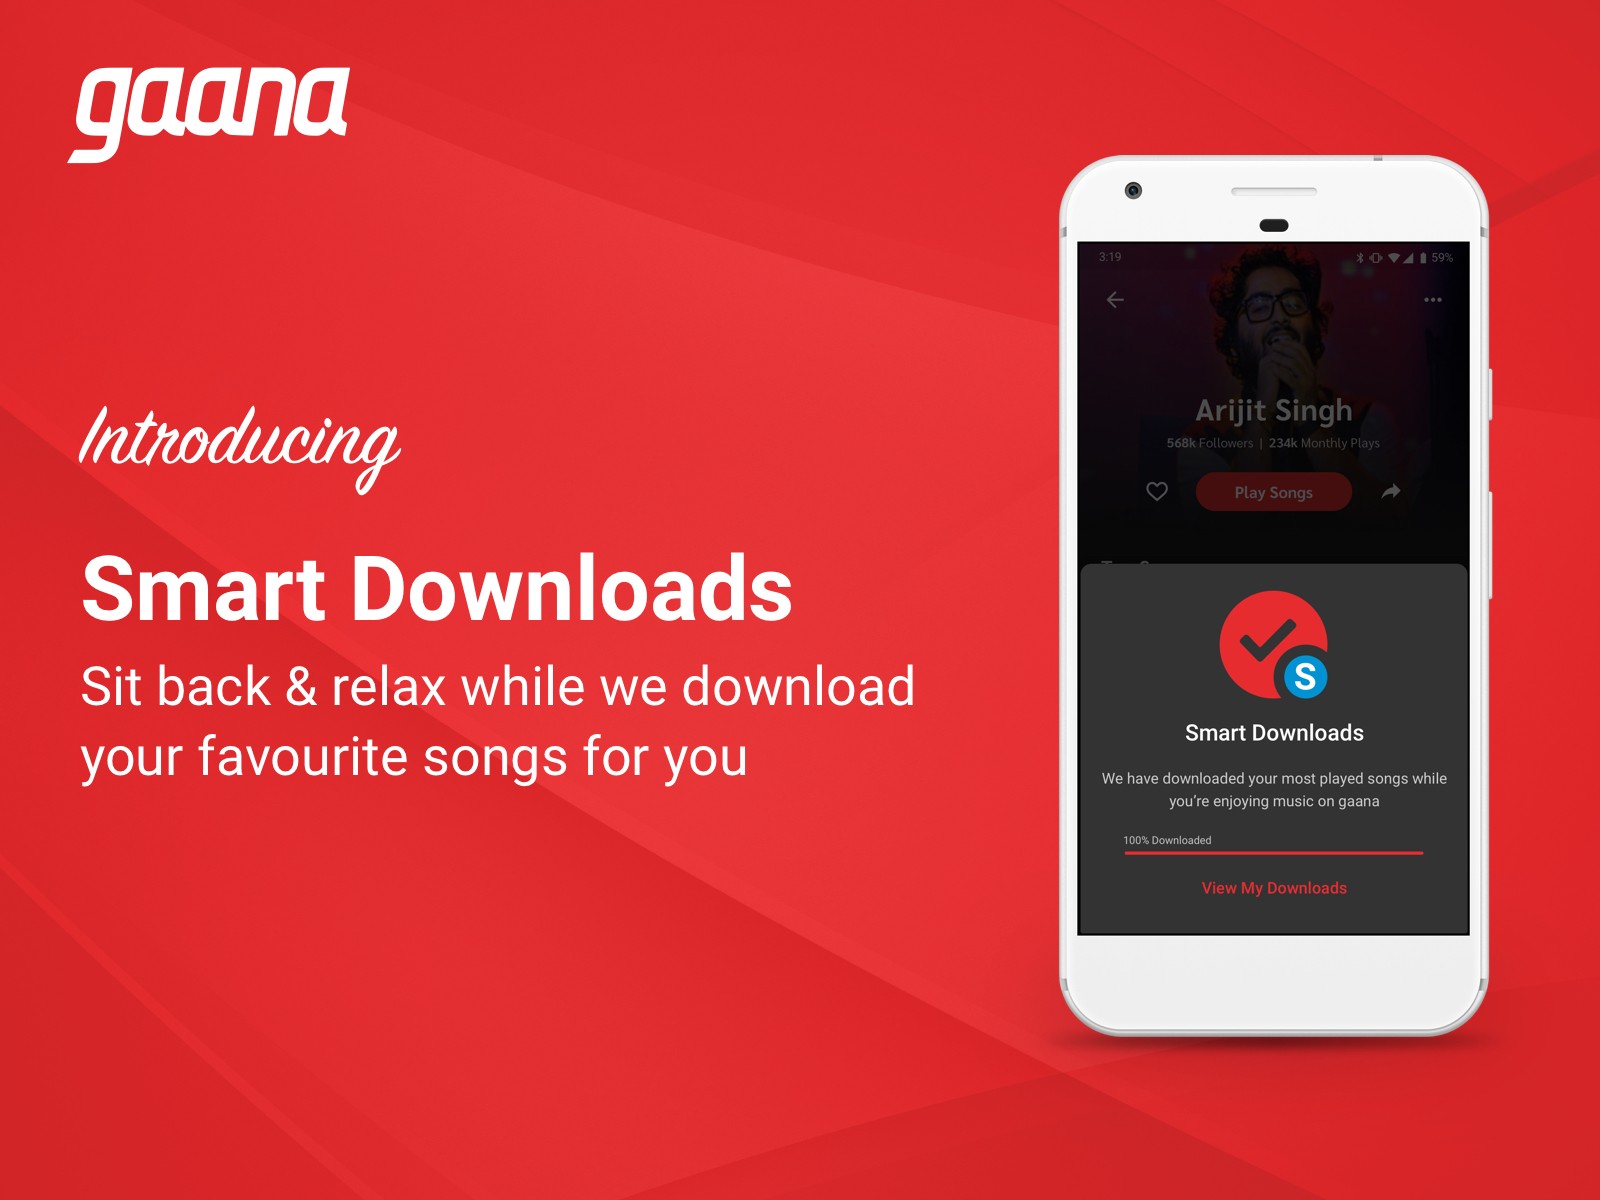 Gaana adds feature to download the songs you love for you